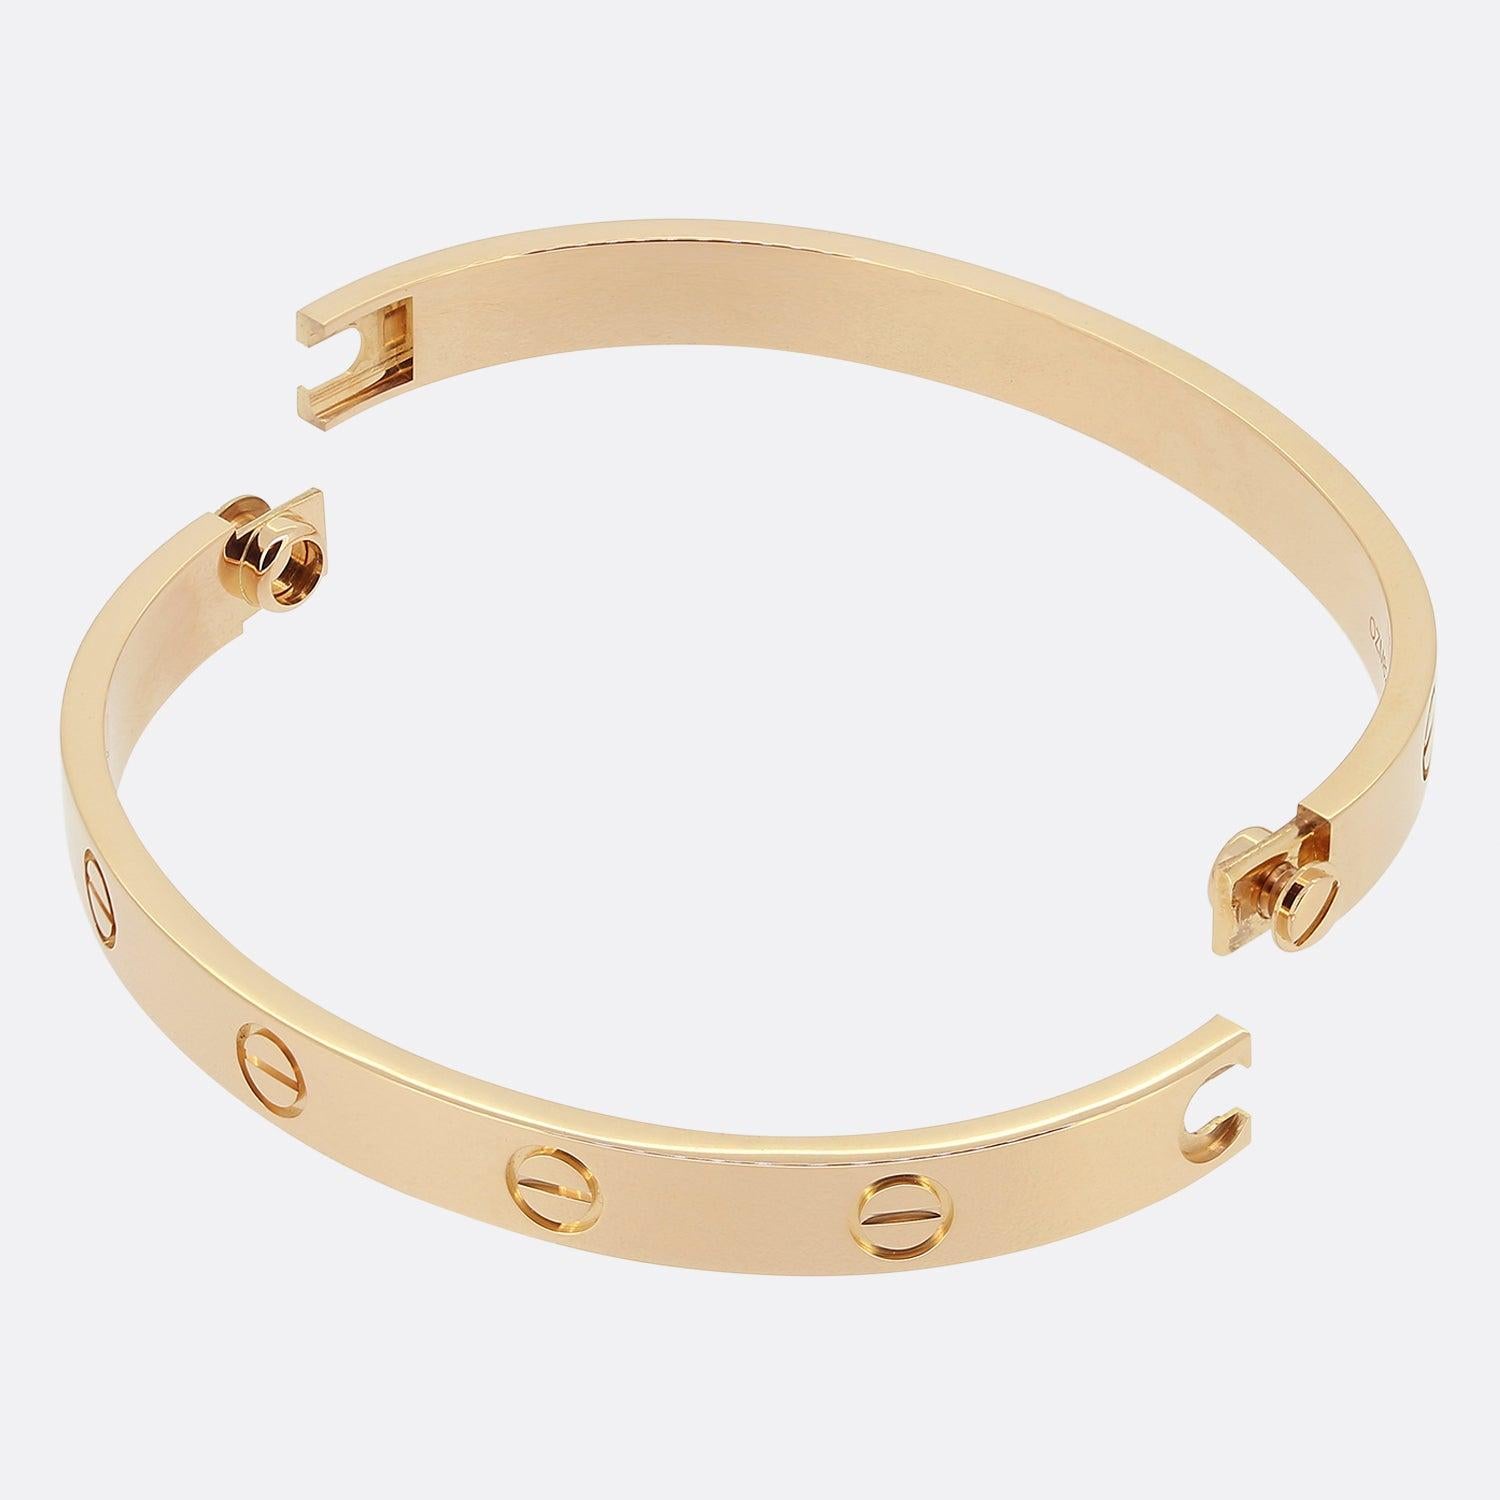 Here we have an 18ct rose gold bangle from the world renowned luxury jewellery house of Cartier. This bangle forms part of the LOVE collection and is one of the most celebrated items of jewellery in the world. This particular model features the